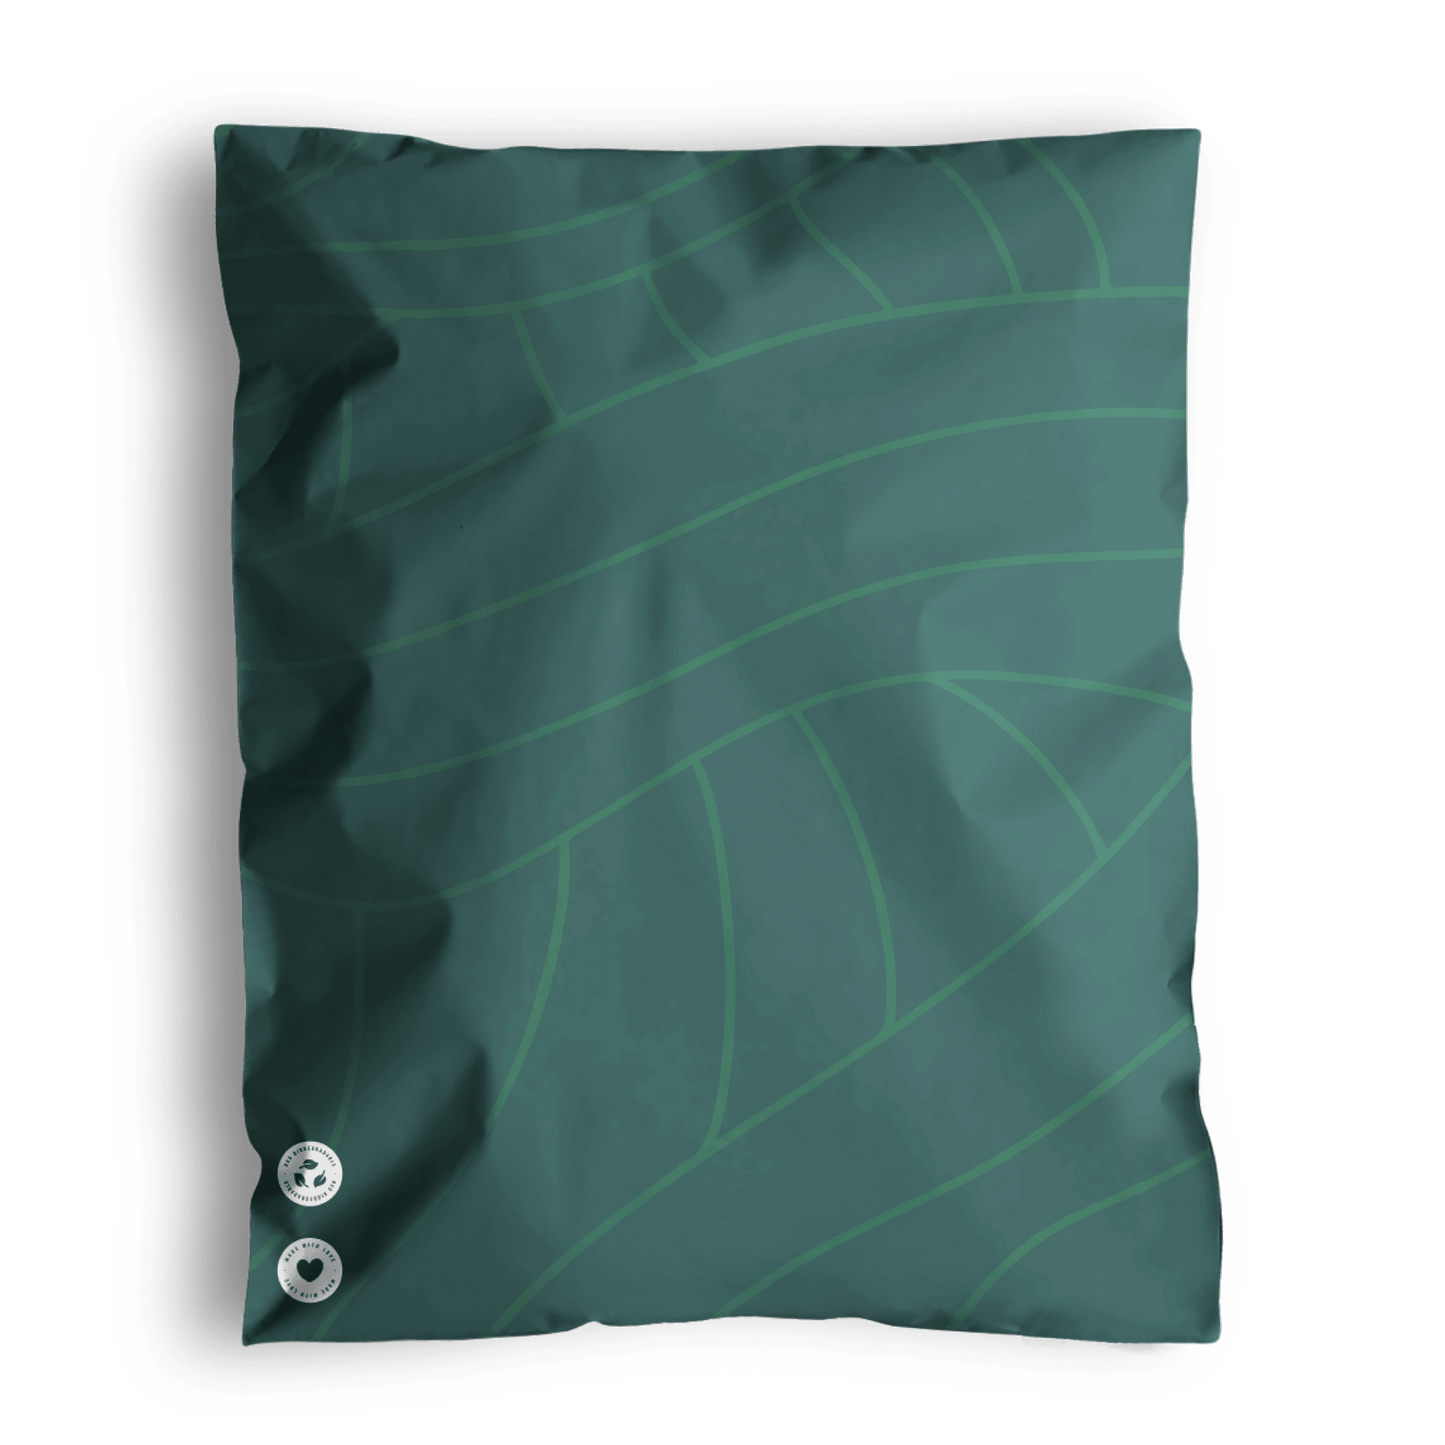 Illustration of a soft cushion with a green leaf pattern, crafted from 100% recyclable materials, and three visible buttons made of impack.co's Olive Leaf Biodegradable Mailers 10" x 13".